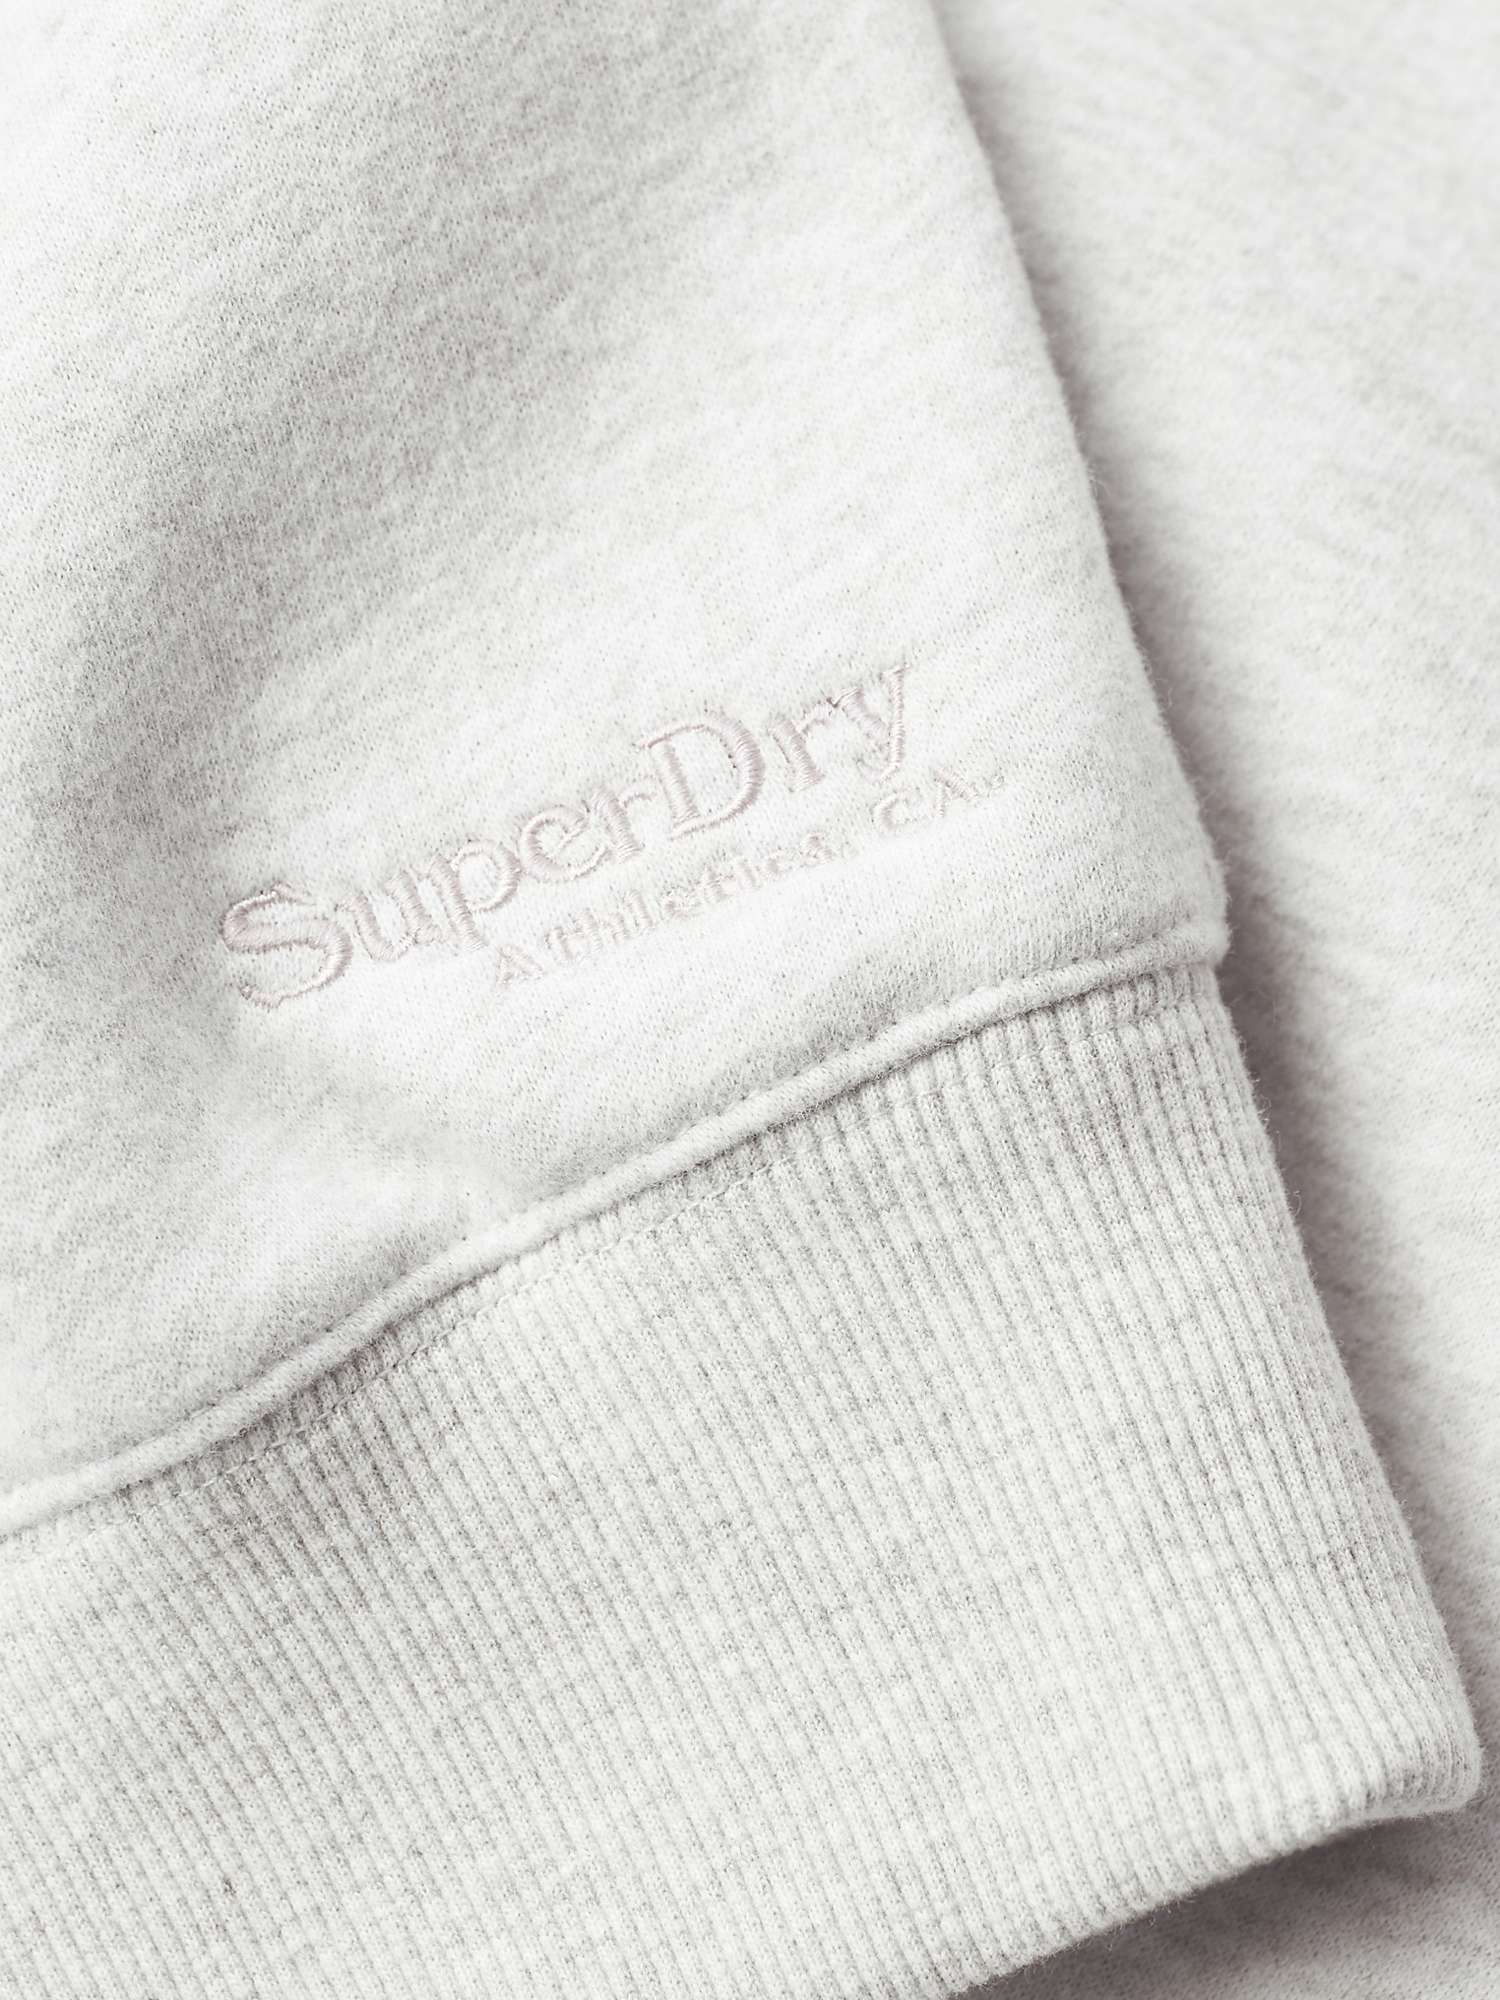 Buy Superdry Essential Logo Relaxed Fit Sweatshirt Online at johnlewis.com